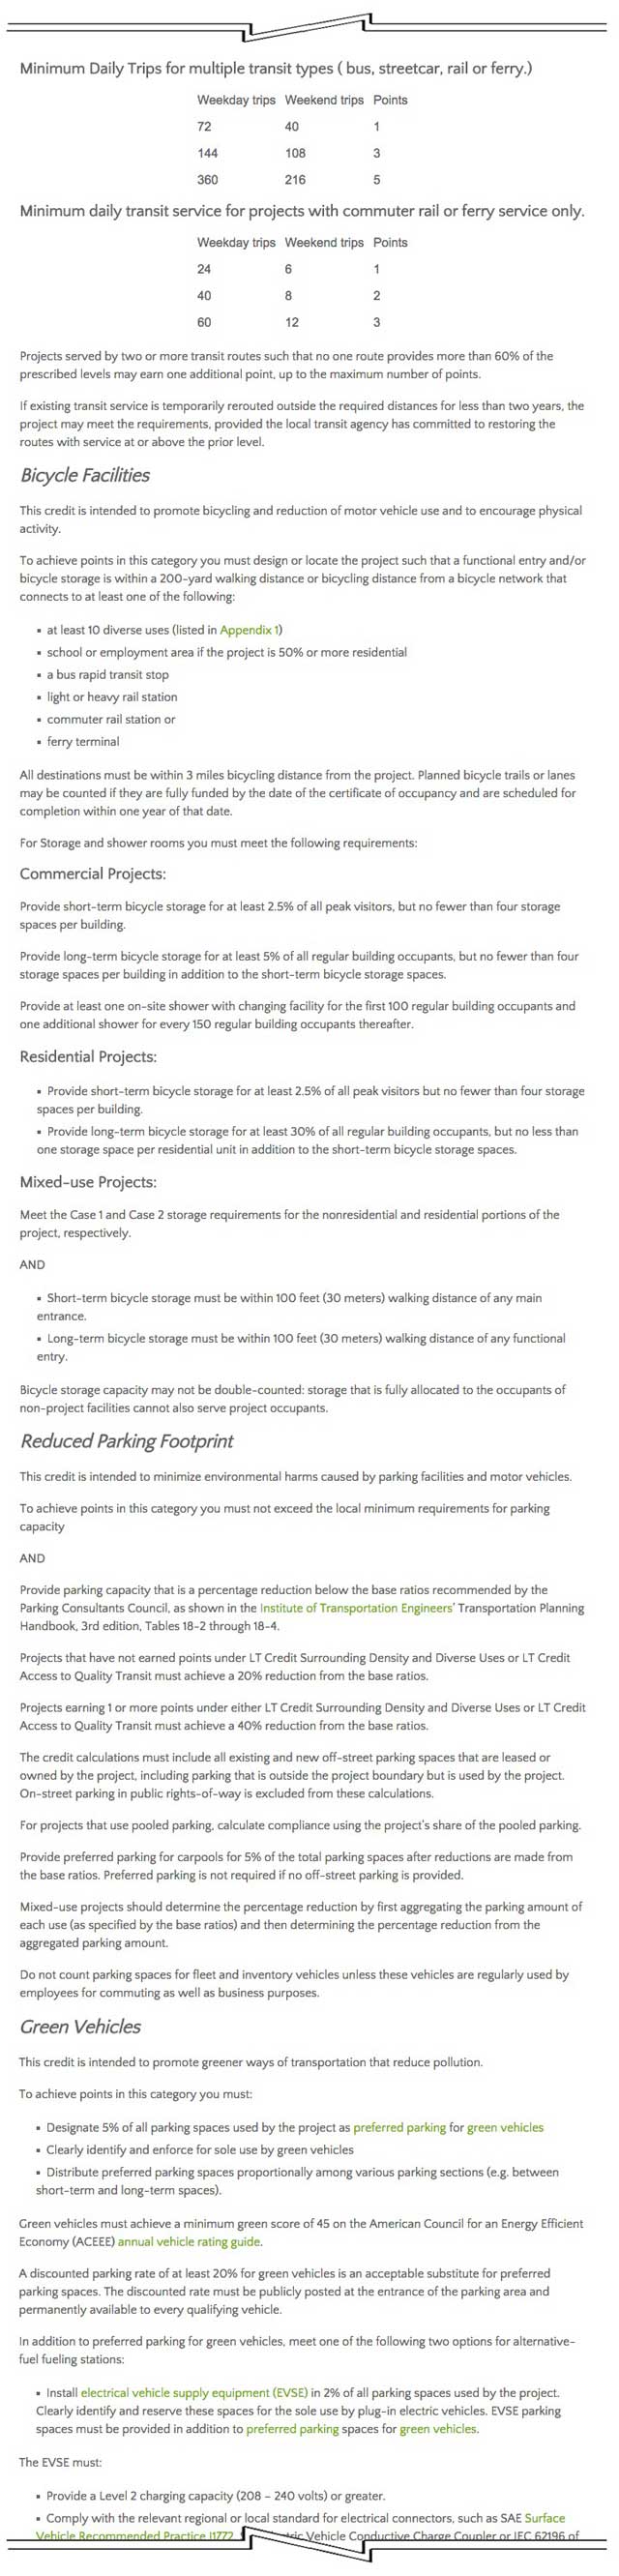 Global Healing and Regeneration - Jacky Tustain (Project Manager) also continued helping us convert the LEED Certification research done by Matheus Manfredini (Civil Engineering Student and Urban Design Coordinator) into a webpage. Here are the 2nd round of pictures of this LEED Tutorial page developing on the site, continuing with formatting and content editing. We’d say we’re about 25% complete with this tutorial.